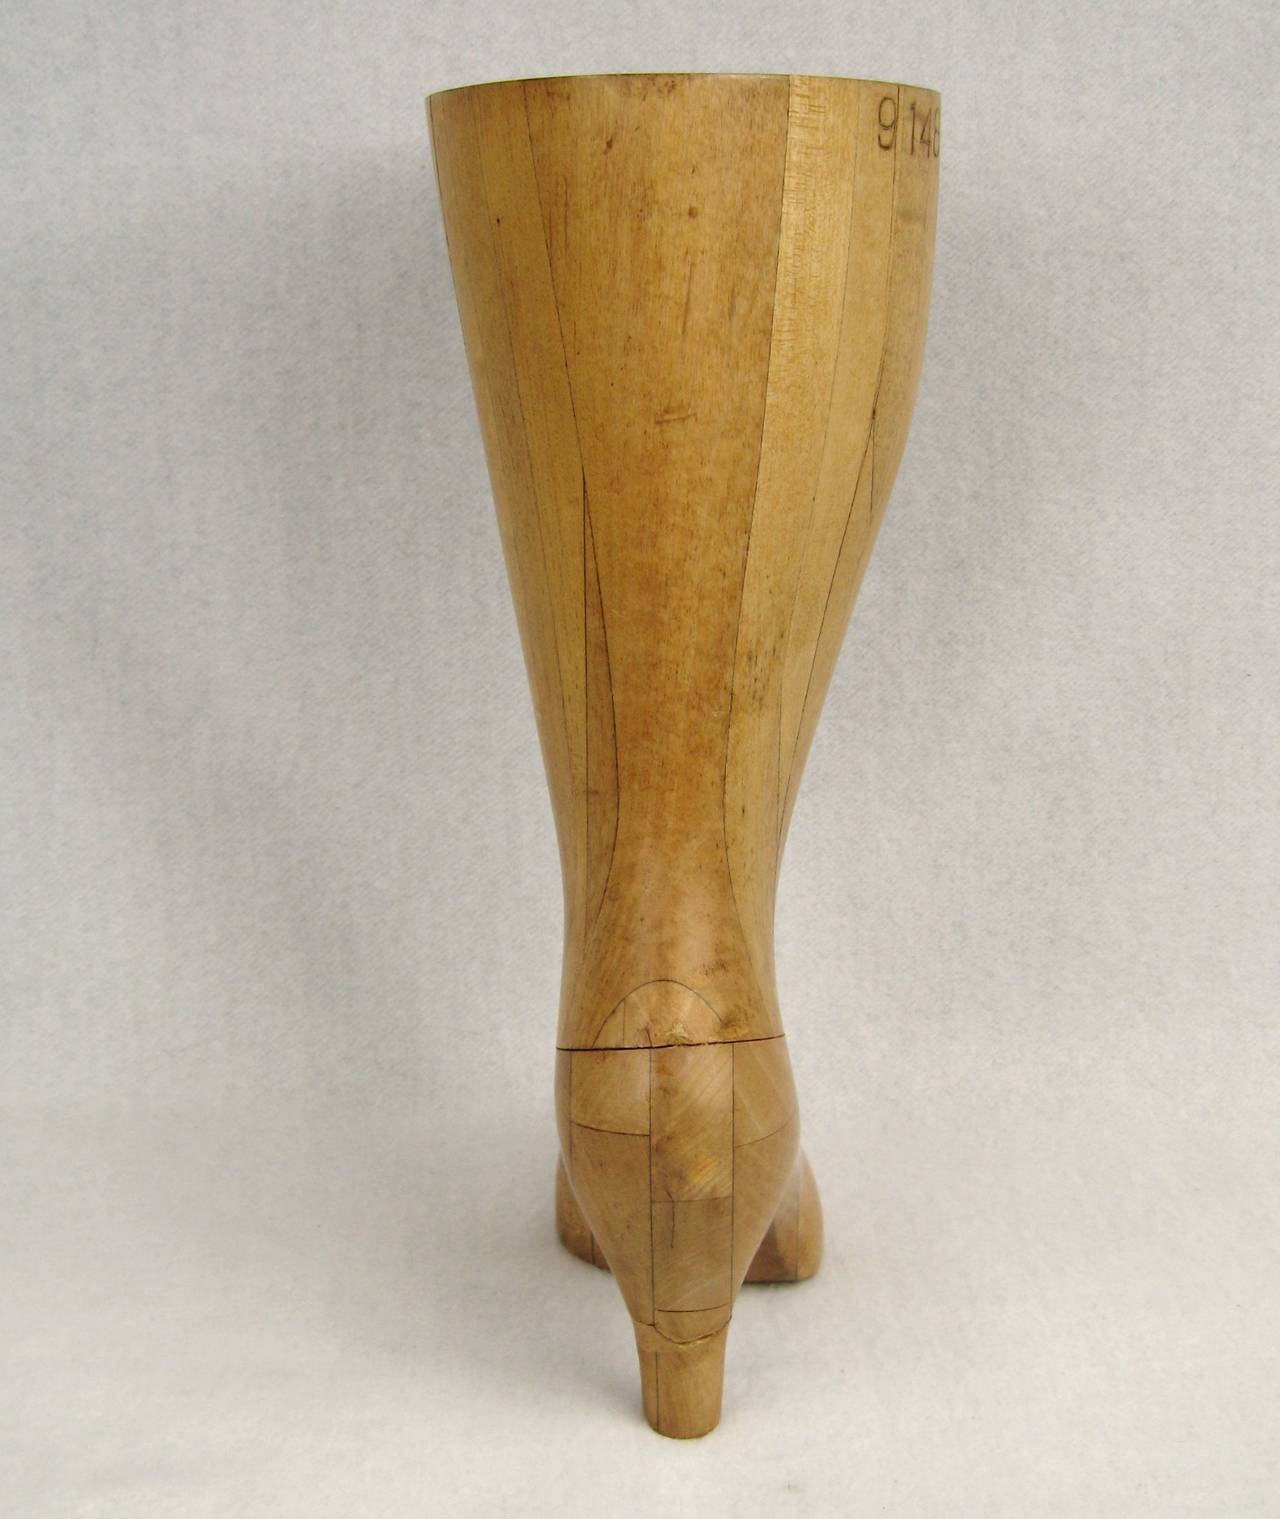 1930s Wood Boot Sculpture Mold In Good Condition For Sale In Wallkill, NY